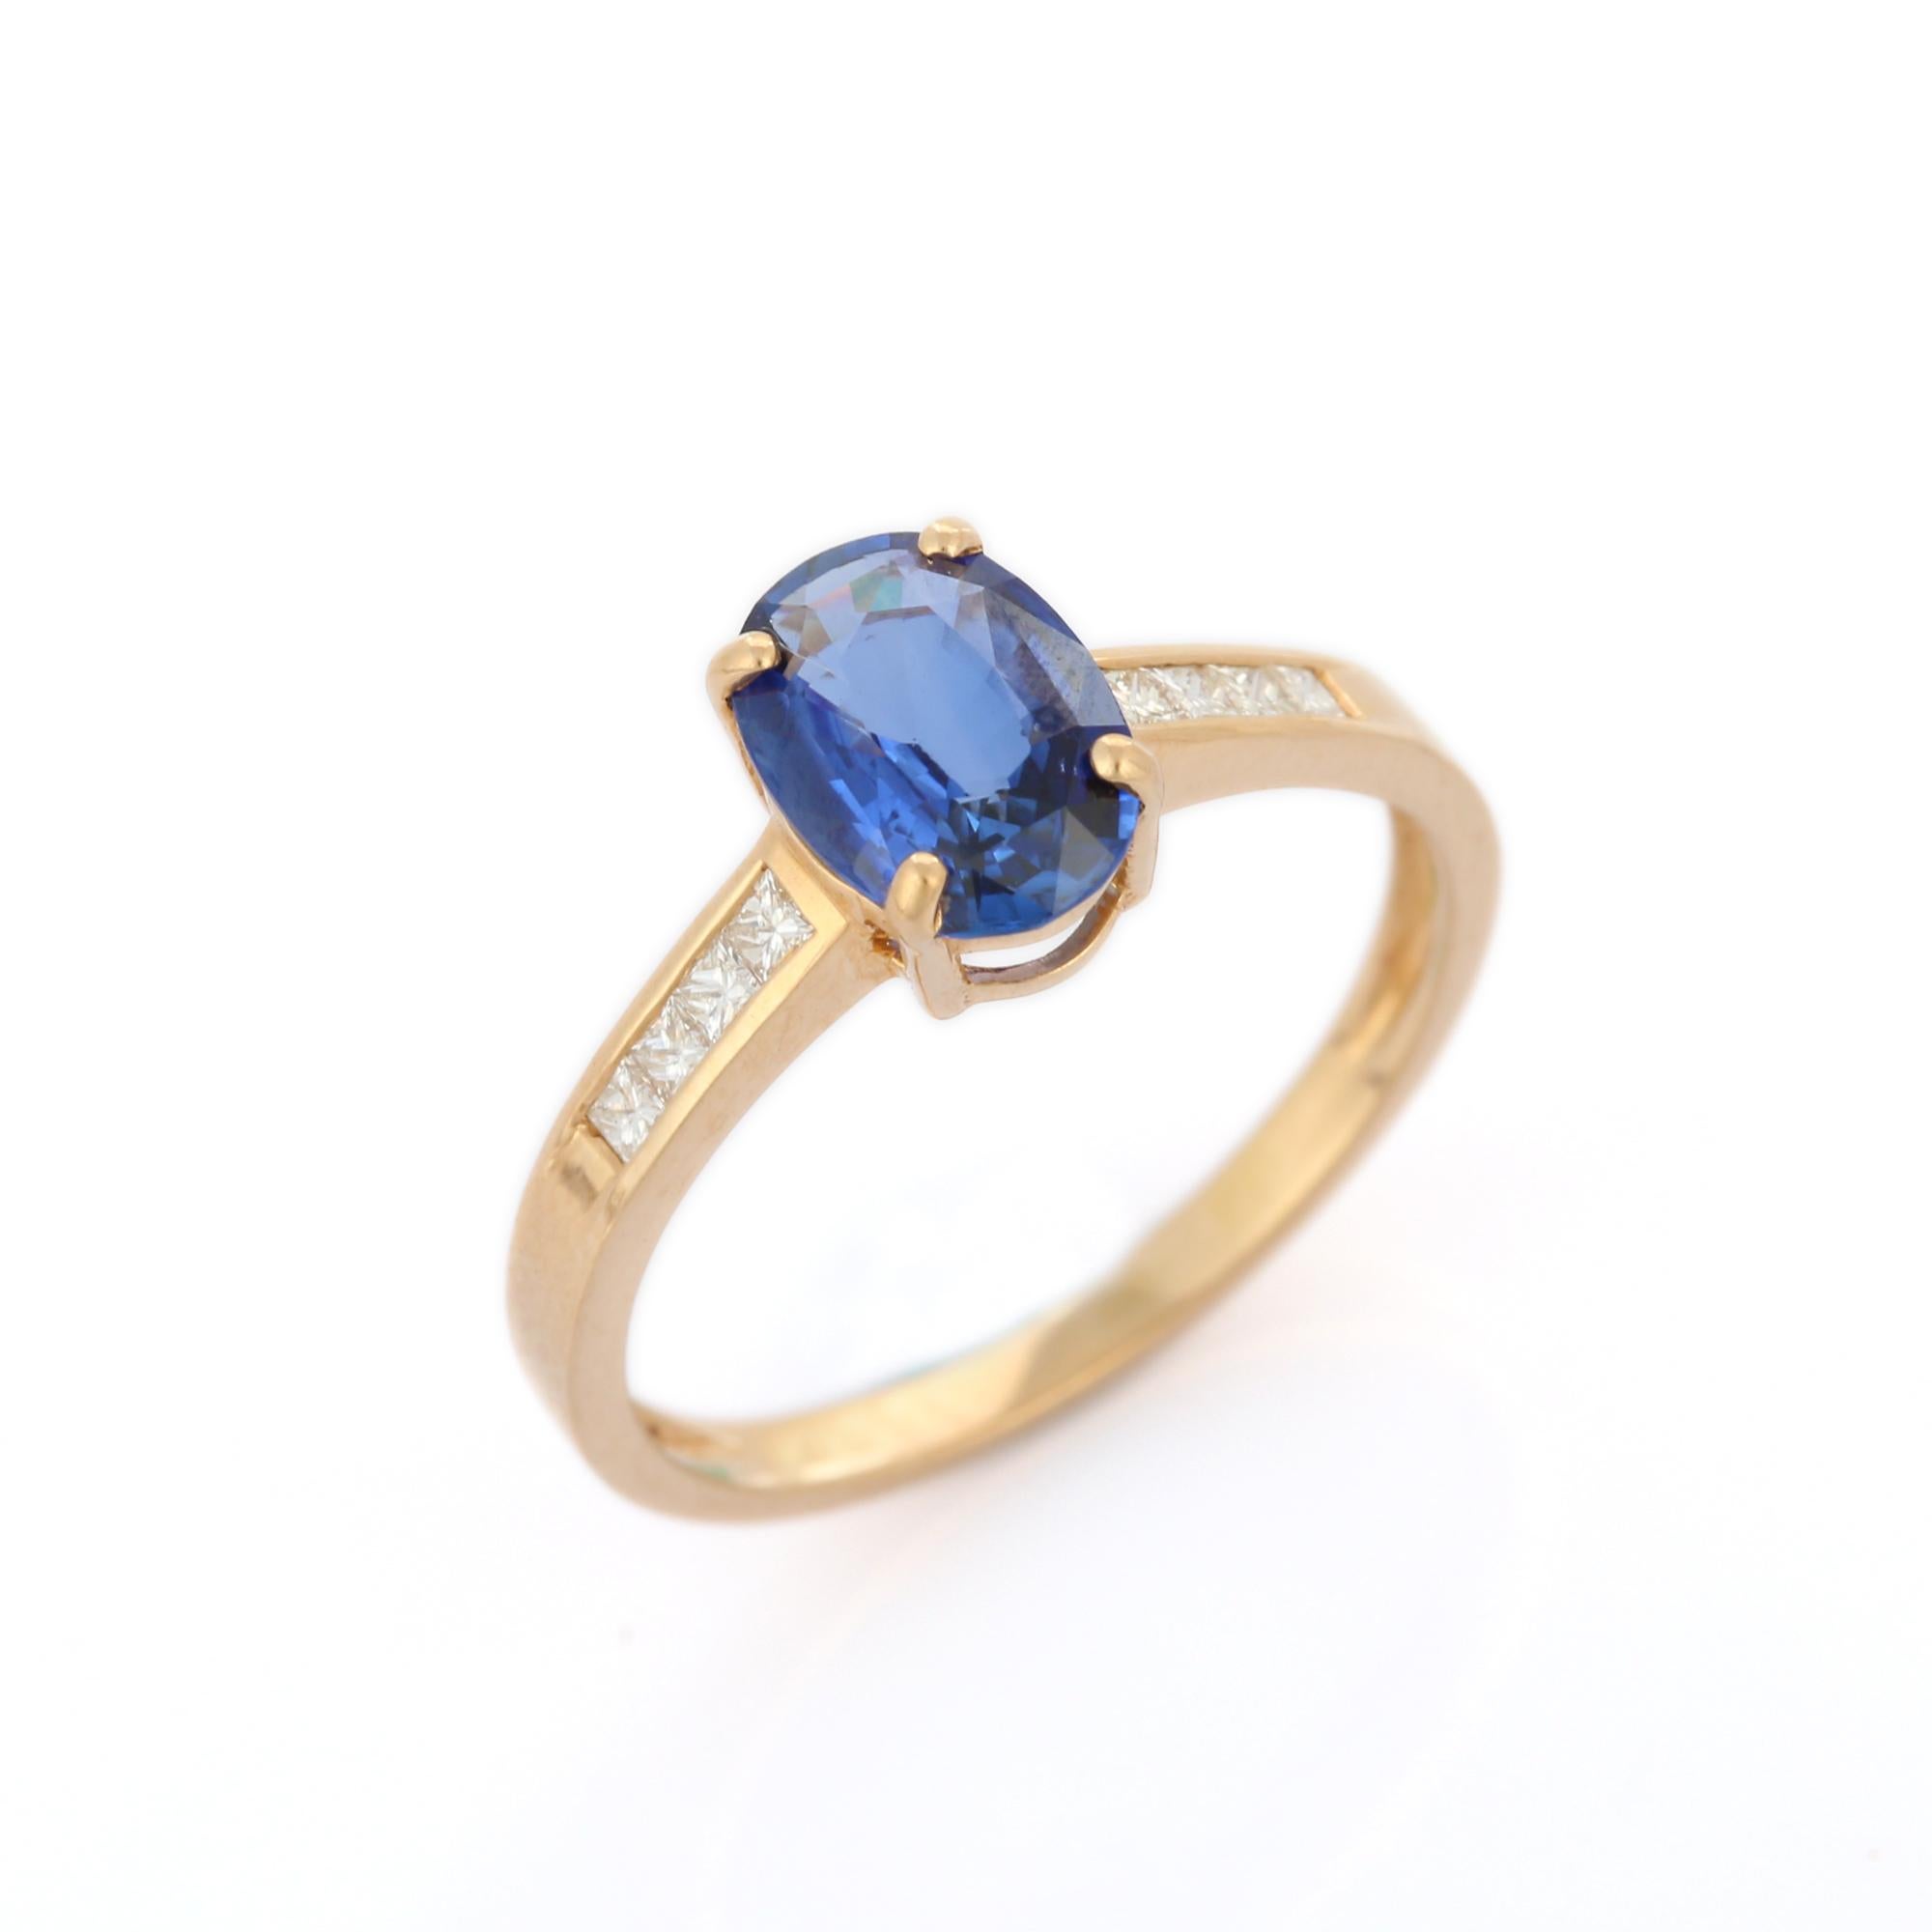 For Sale:  Solitaire Oval Blue Sapphire Diamond Engagement Ring in 14k Solid Yellow Gold 5